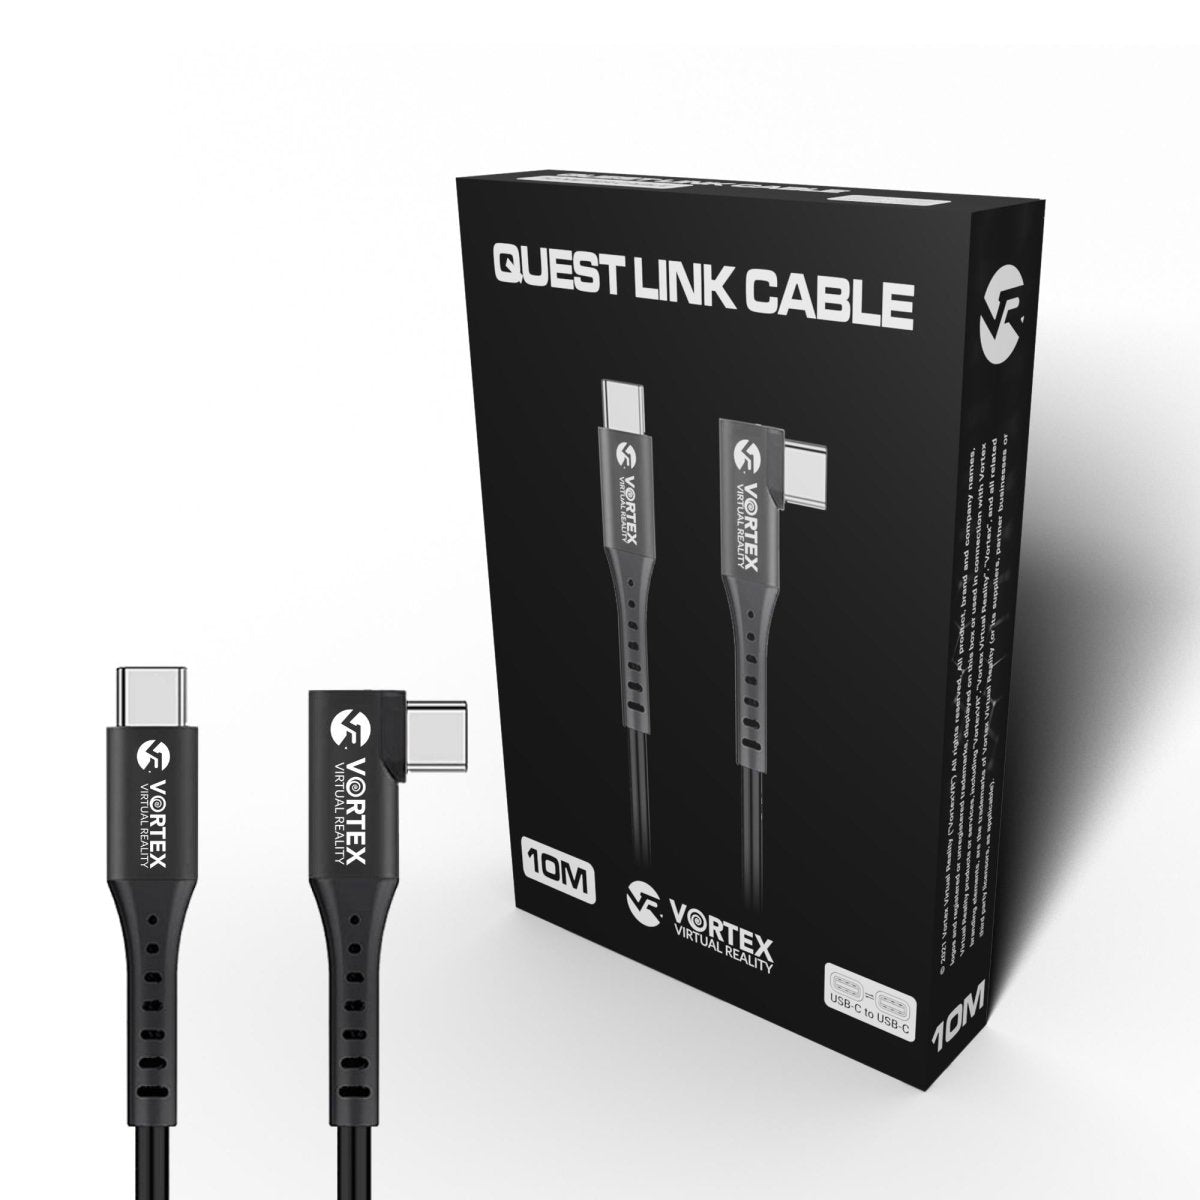 Oculus Link Cable 10m, USB-C, for Quest 3 Quest 2 (or Quest 1)